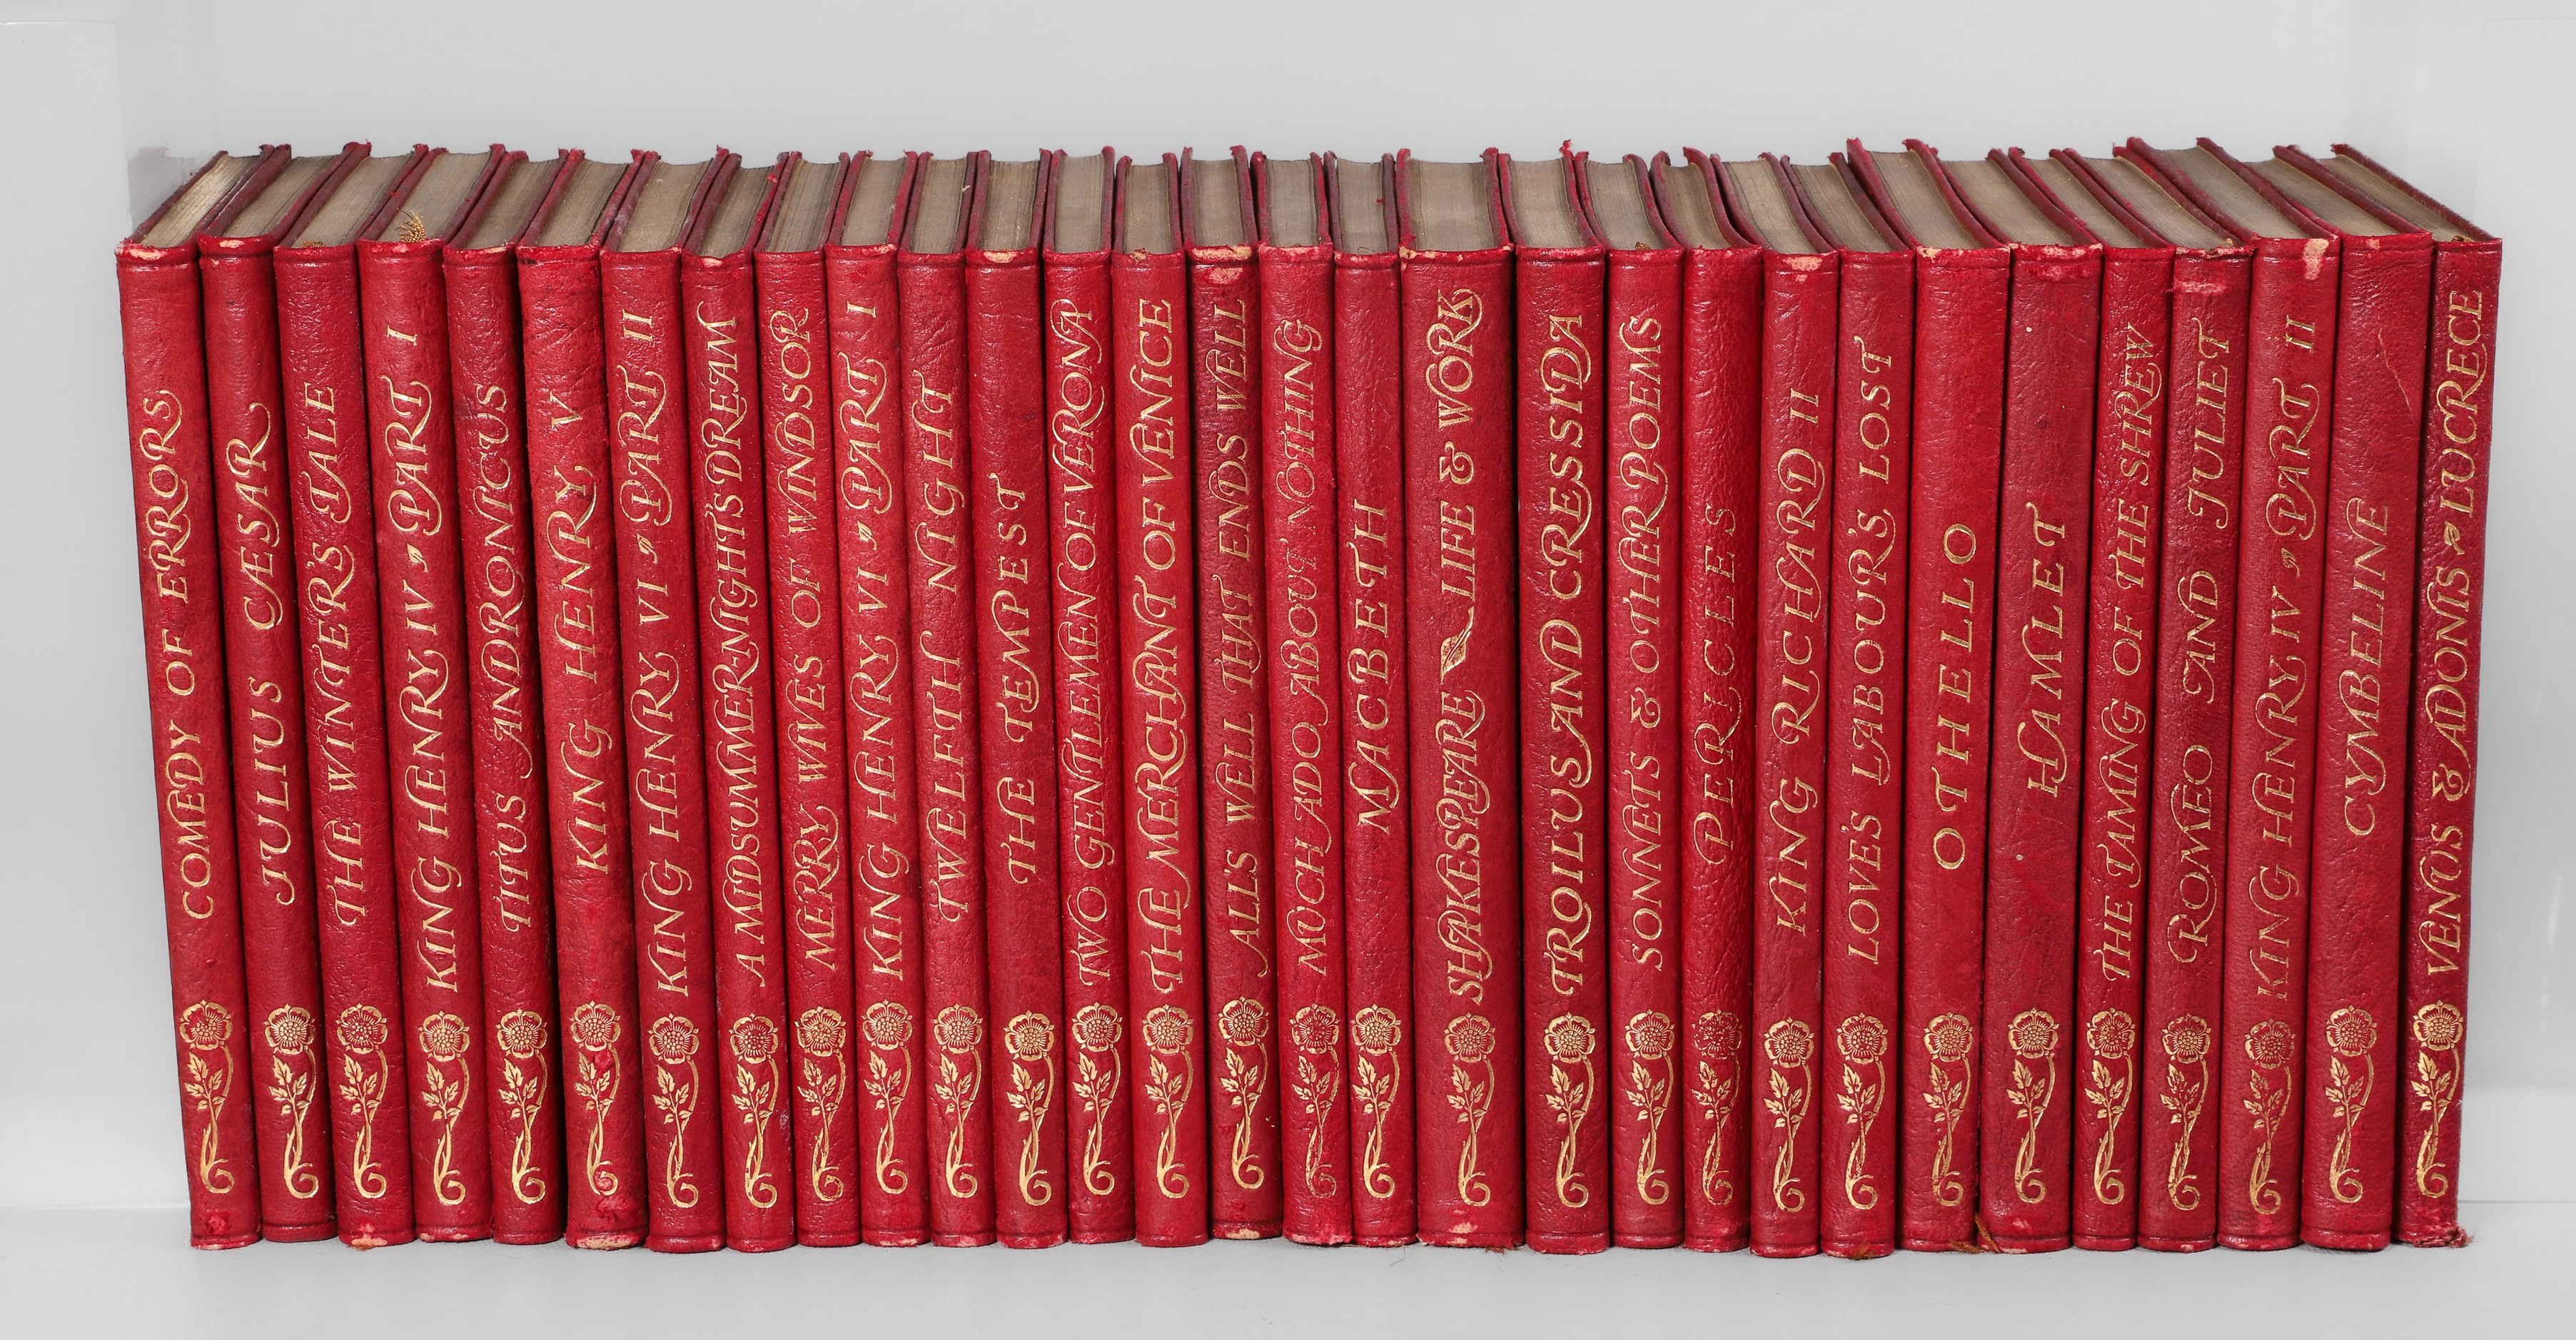 A thirty-volume set of the Works